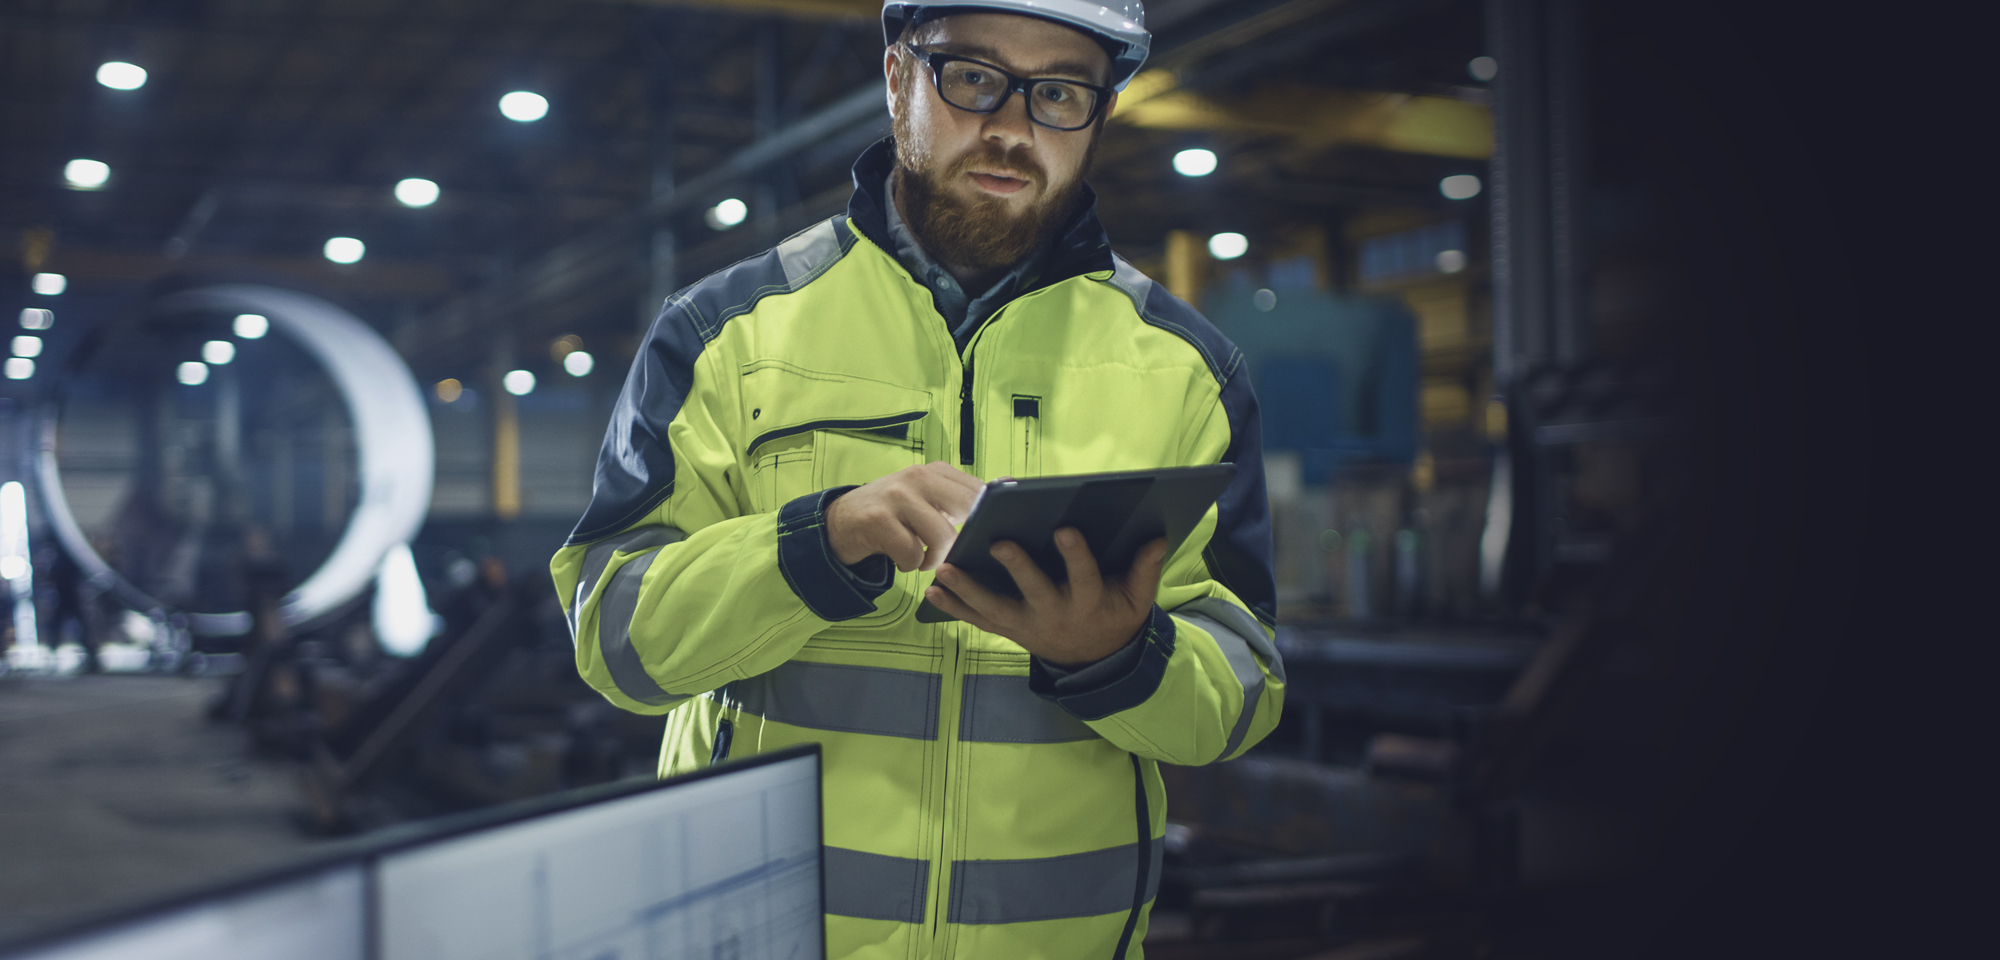 Bearded man holding a tablet in an industrial environment